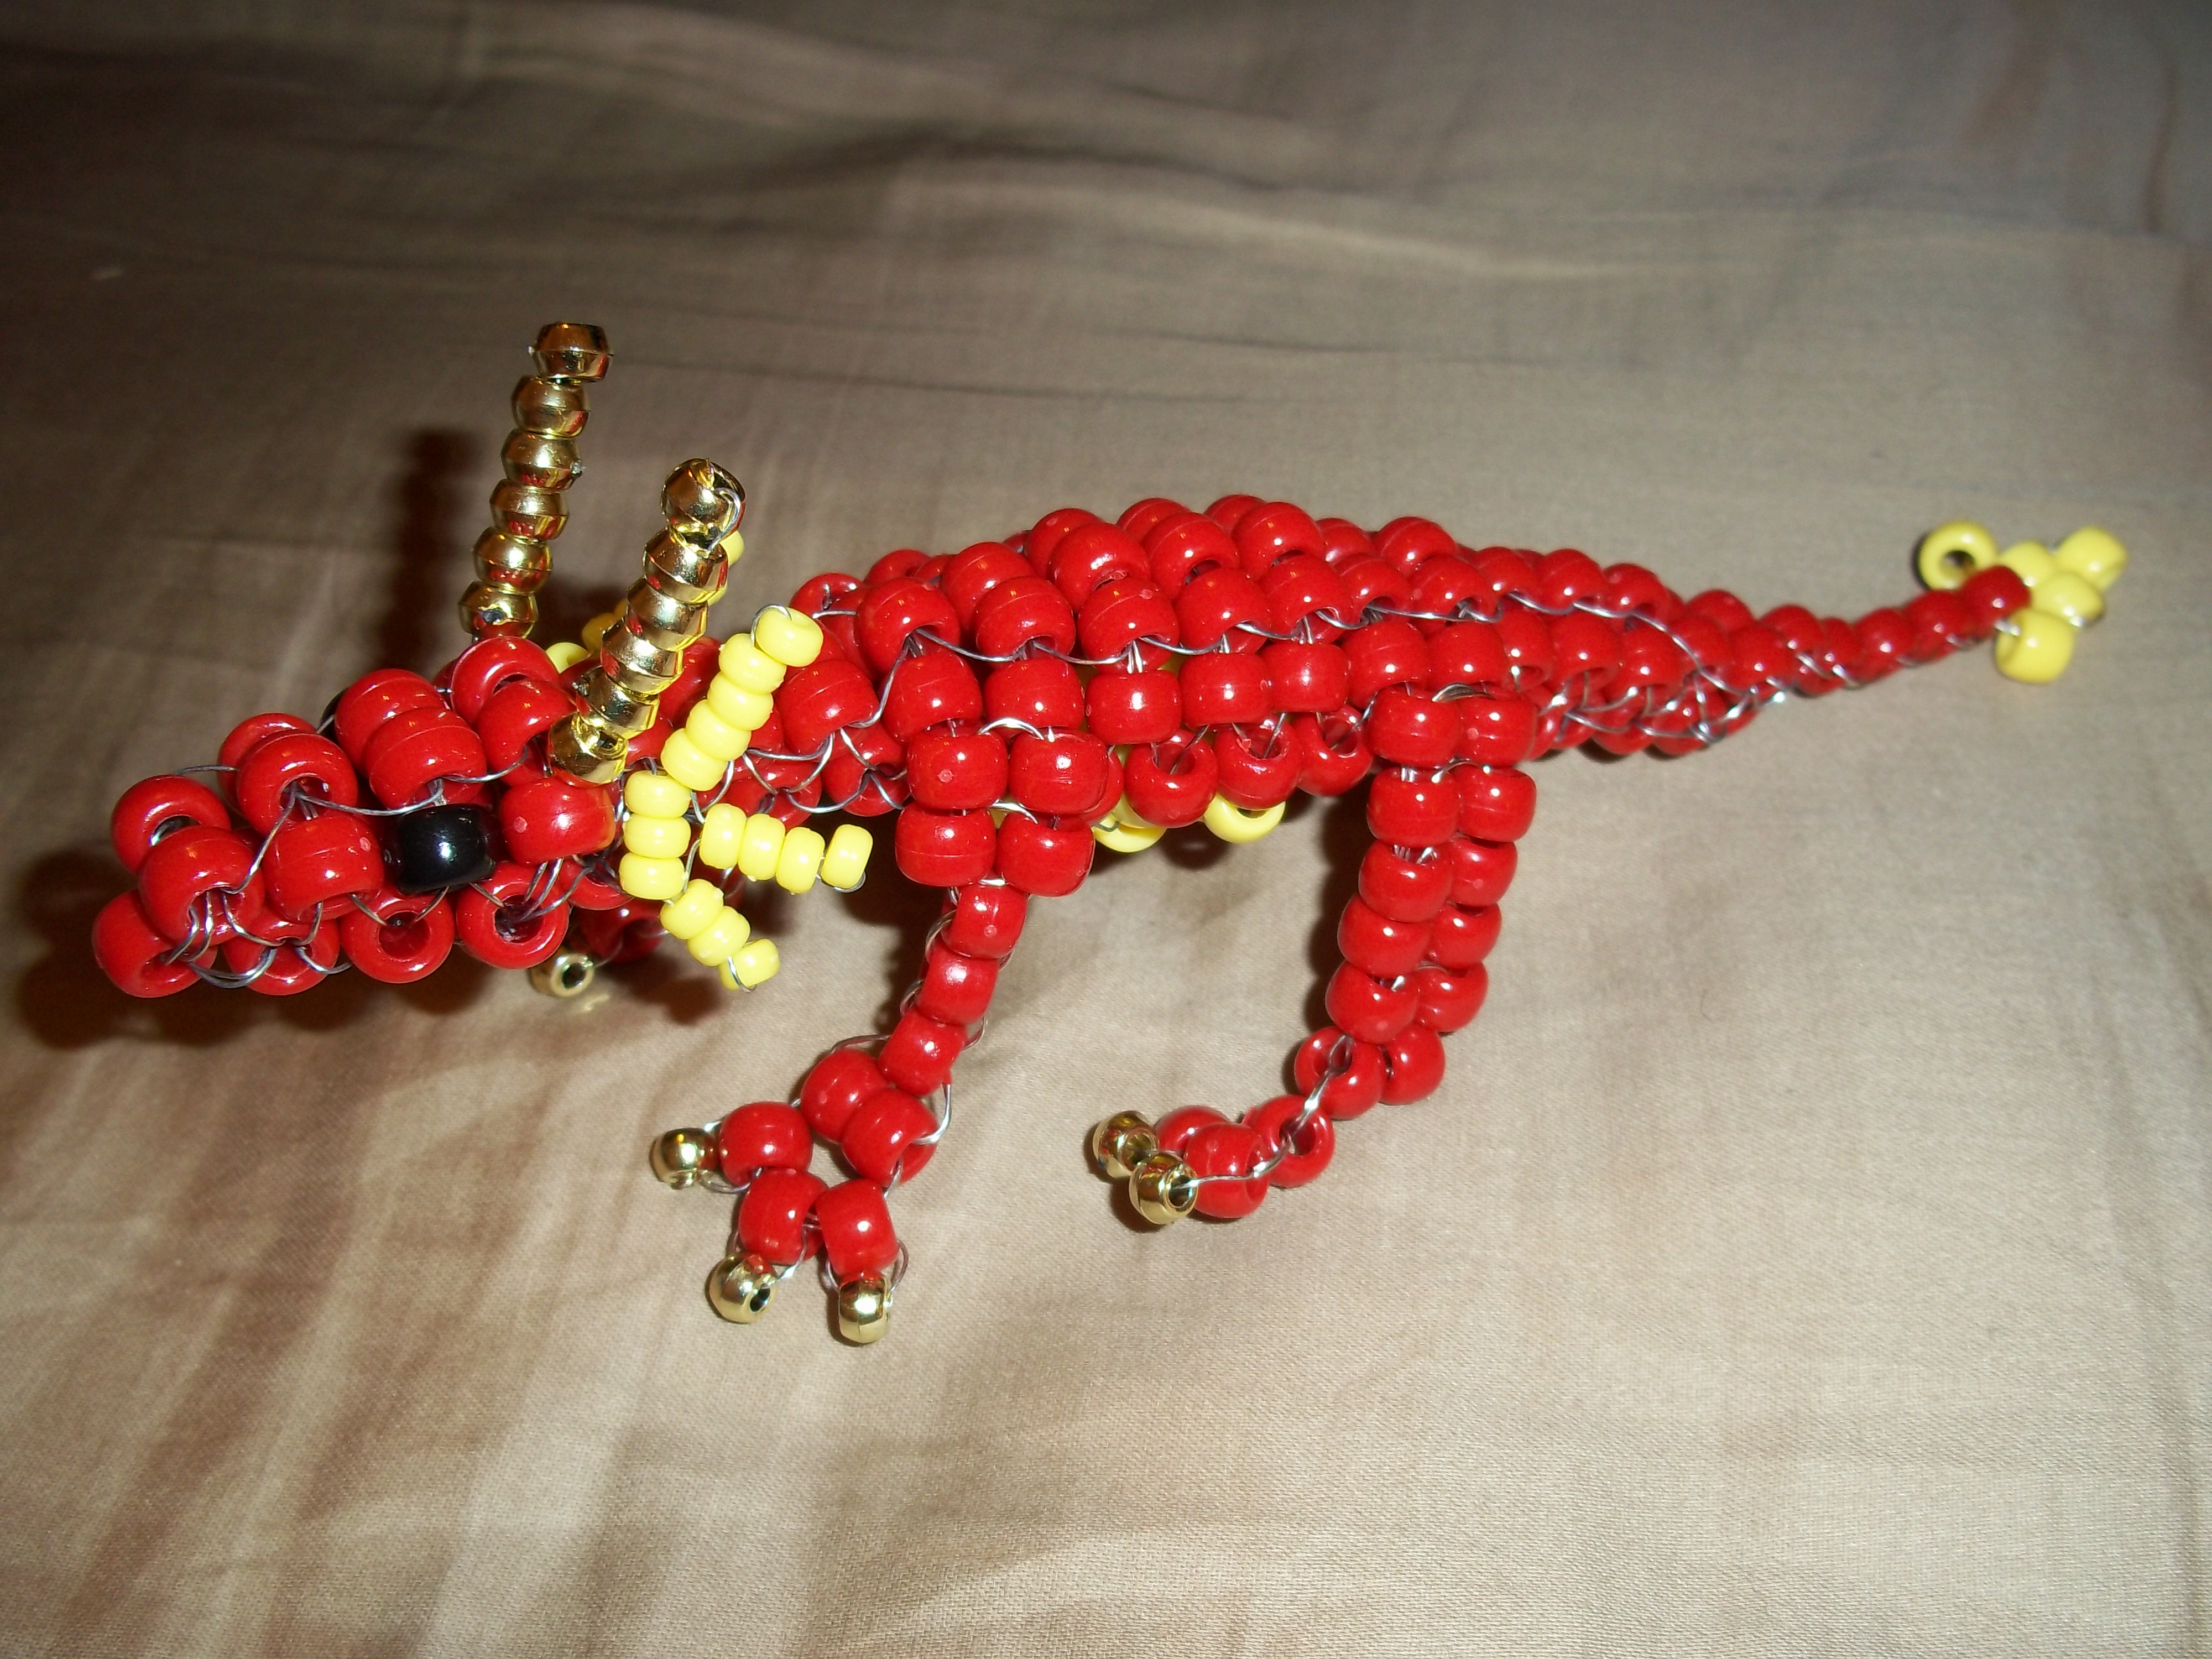 Big Red 3D Pony Bead Dragon 6 by Industrial-Pop on DeviantArt